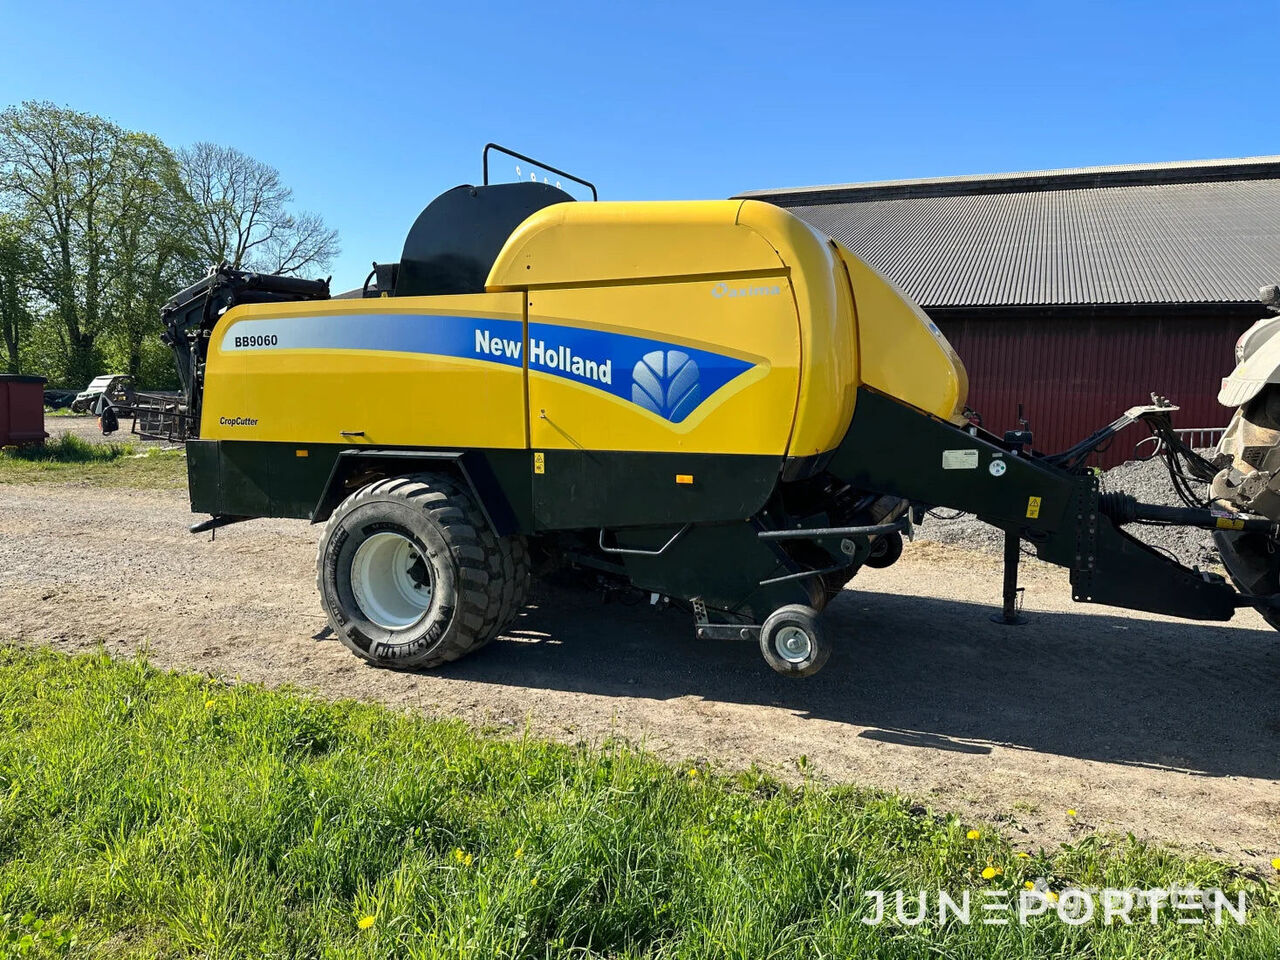 New Holland BB9060 4RS square baler